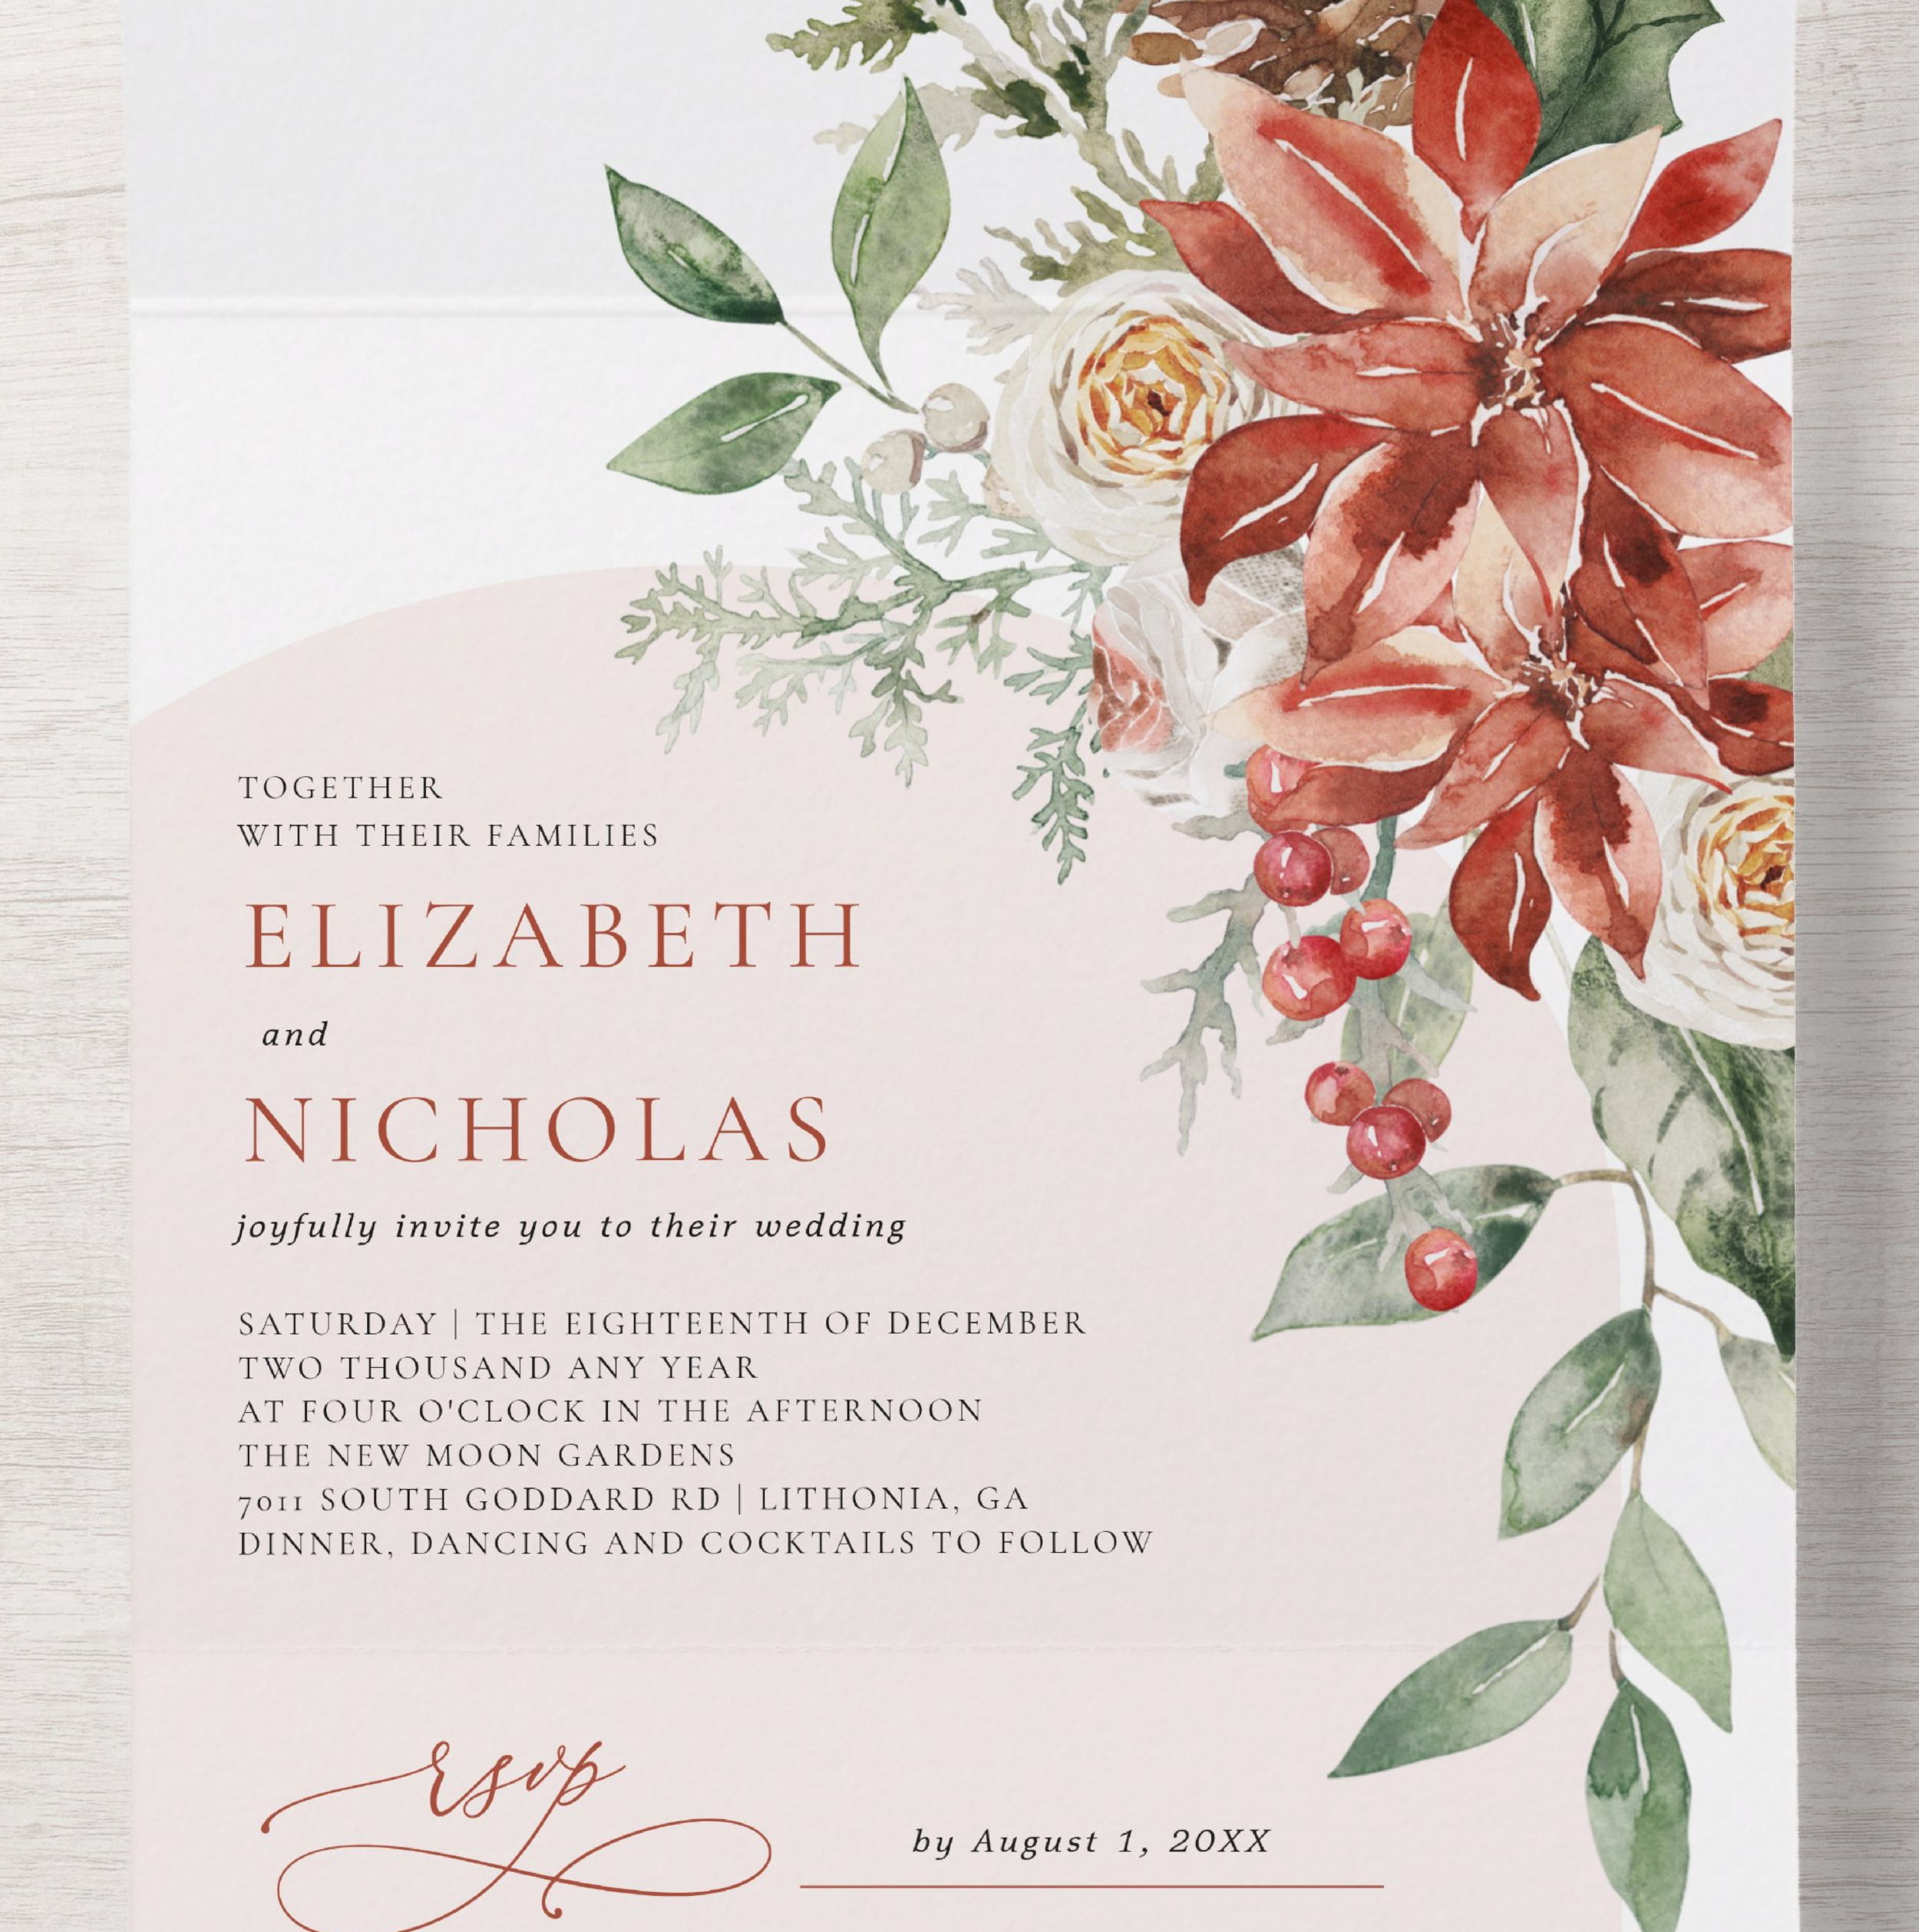 tis_the_season_christmas_wedding_floral_all_in_one_invitation-r3c447a070010465aa1bcc4a7fe497d9b_uogo8_1024.png